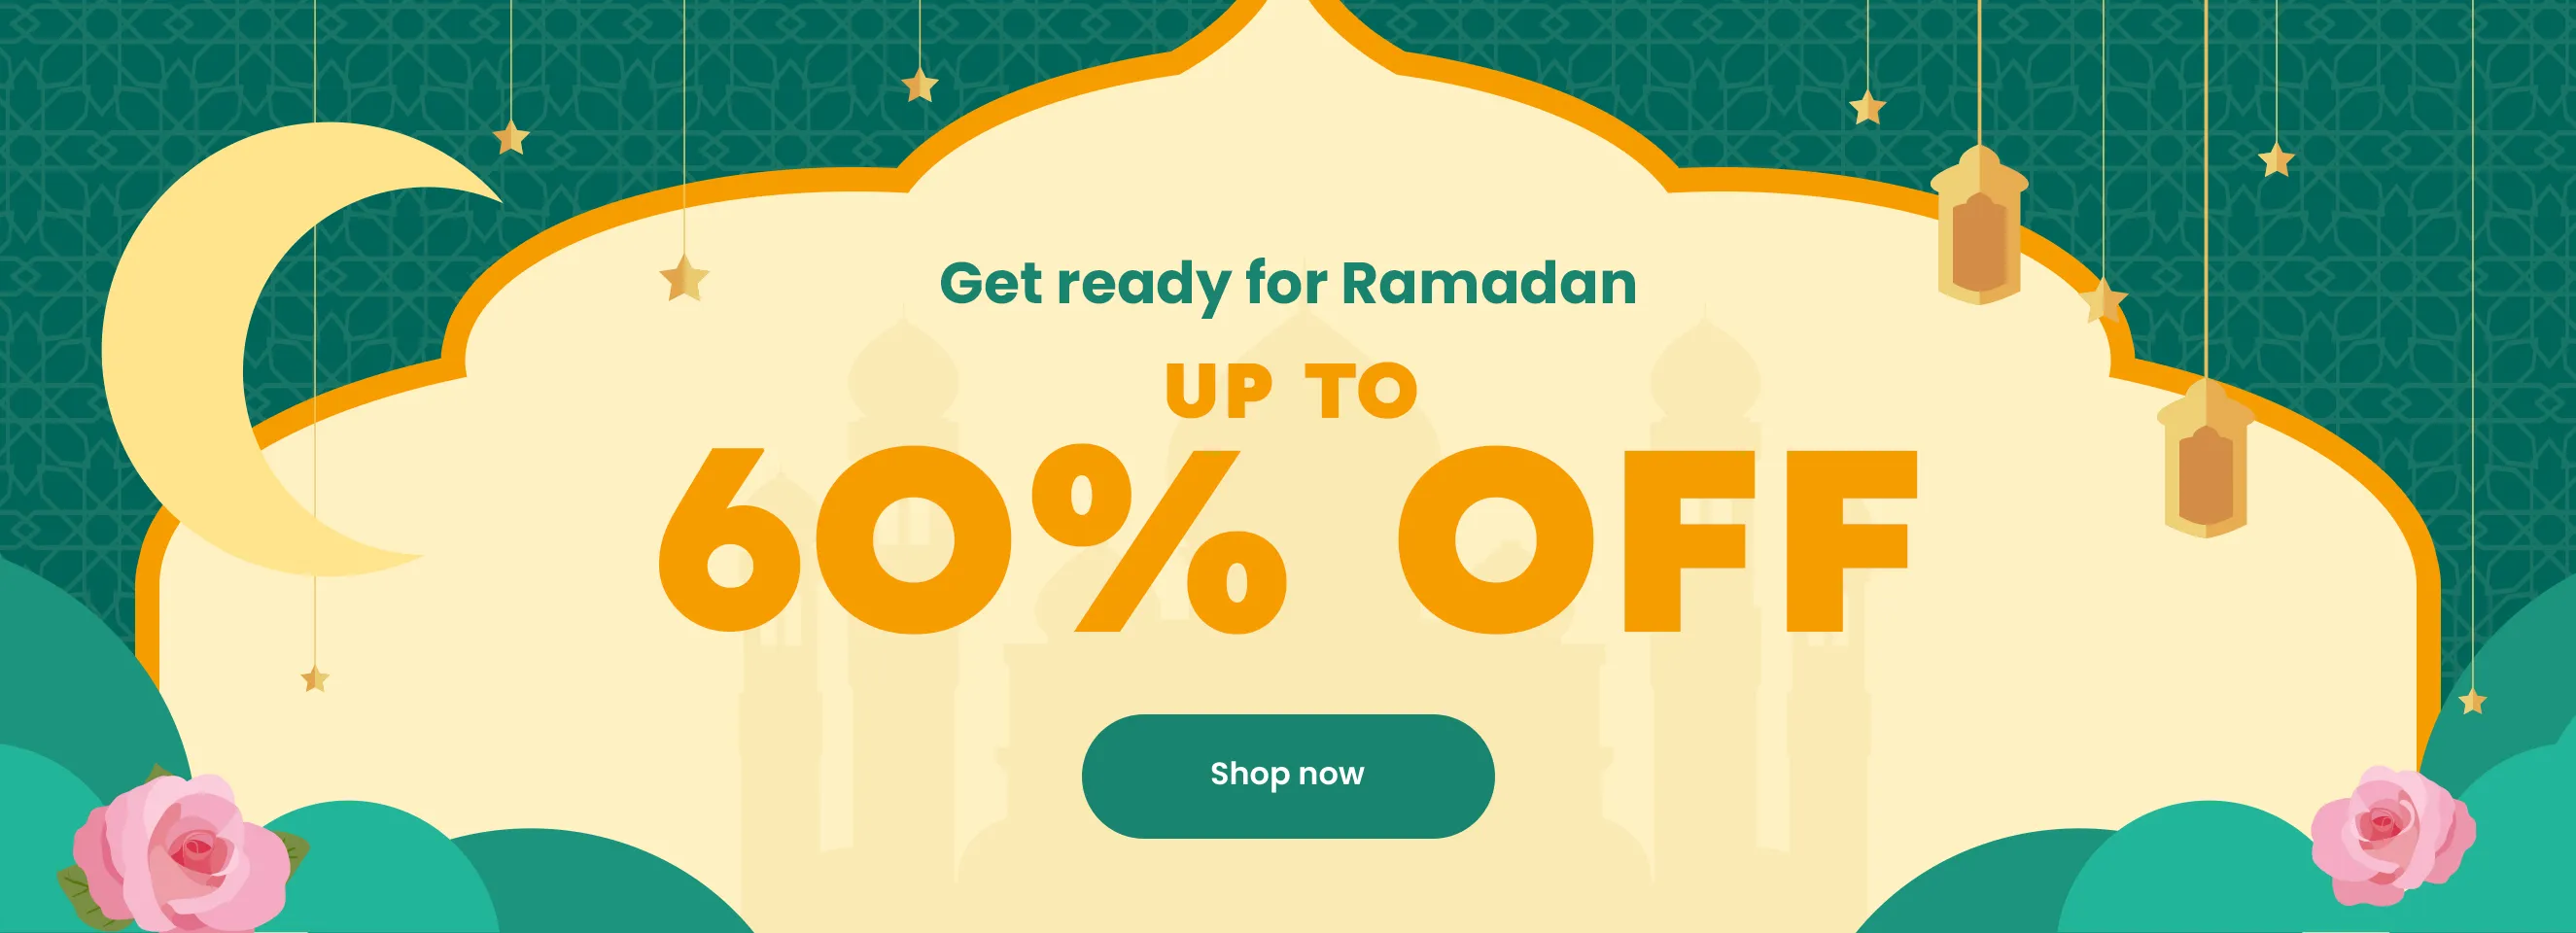 Click it to join Get ready for Ramadan activity